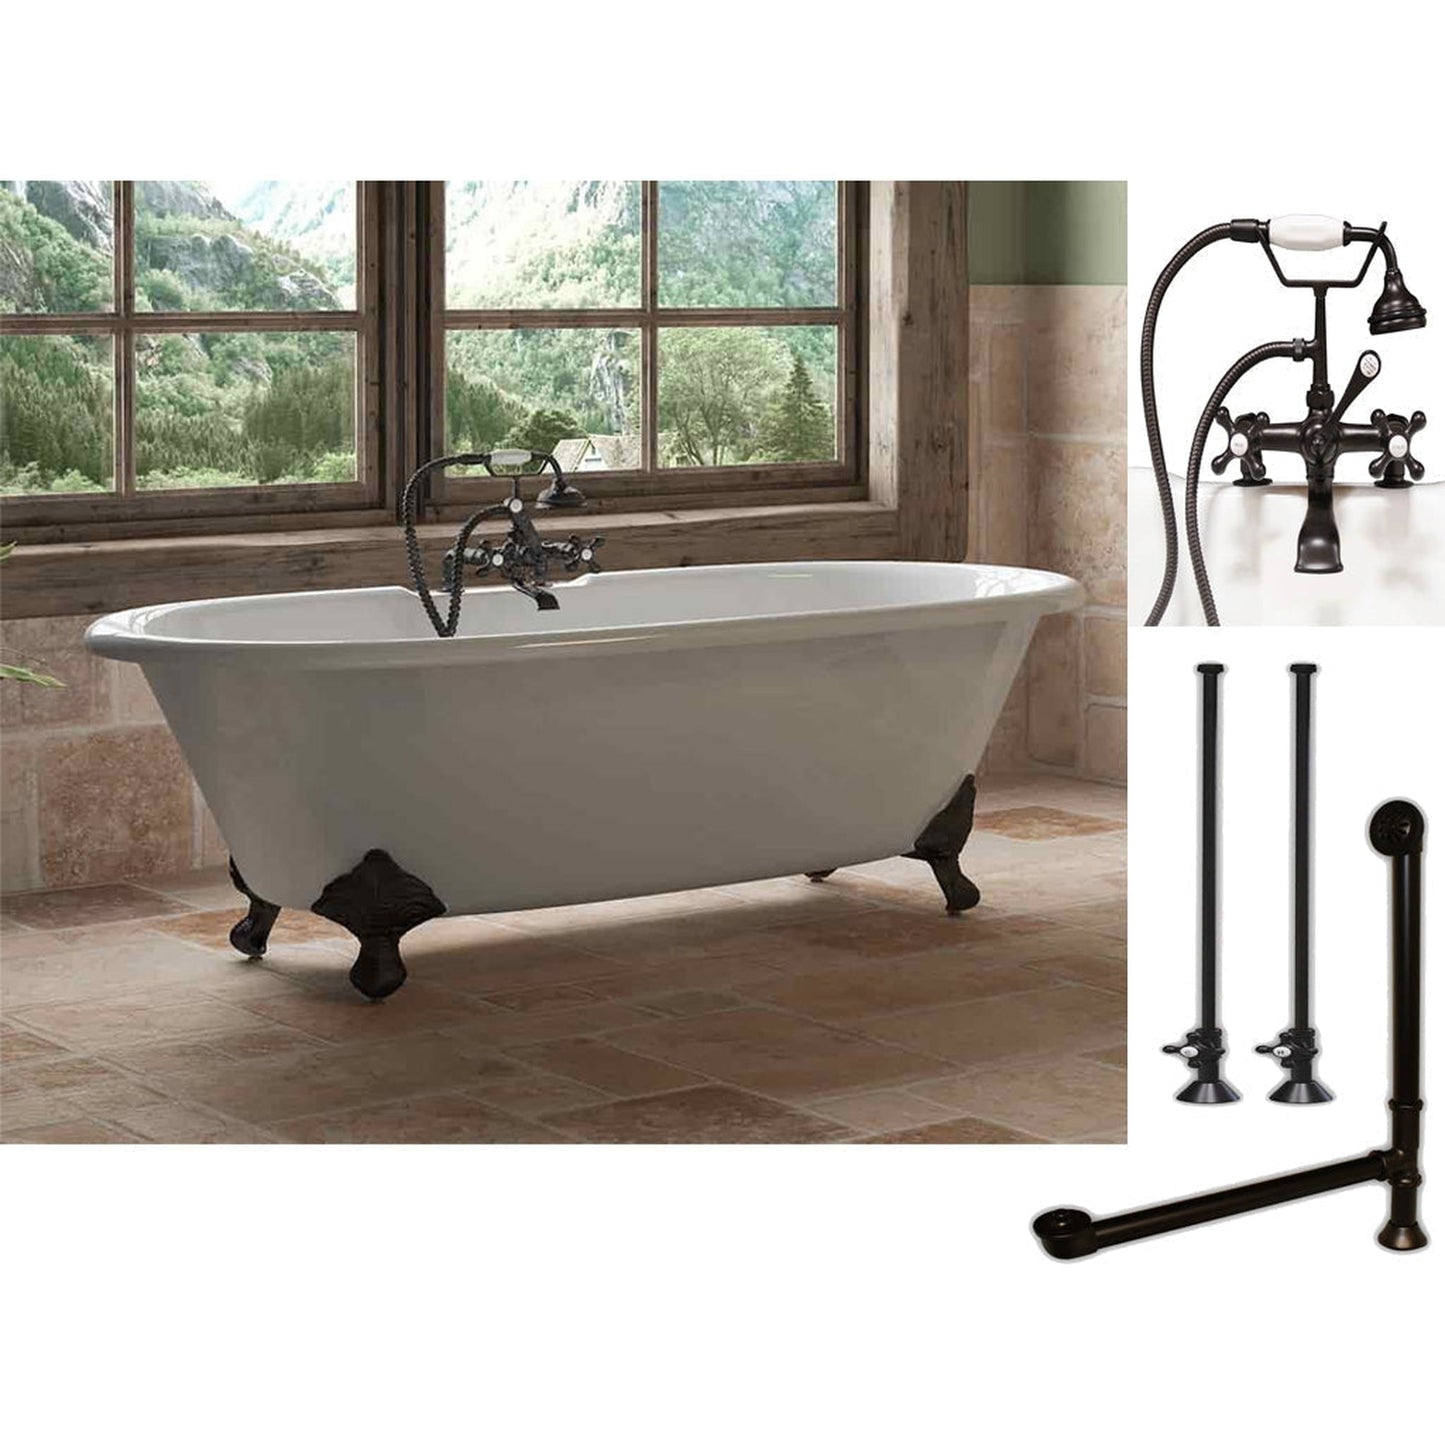 Cambridge Plumbing 67" White Cast Iron Double Ended Clawfoot Bathtub With Deck Holes And Complete Plumbing Package Including 2” Riser Deck Mount Faucet, Supply Lines, Drain And Overflow Assembly In Oil Rubbed Bronze